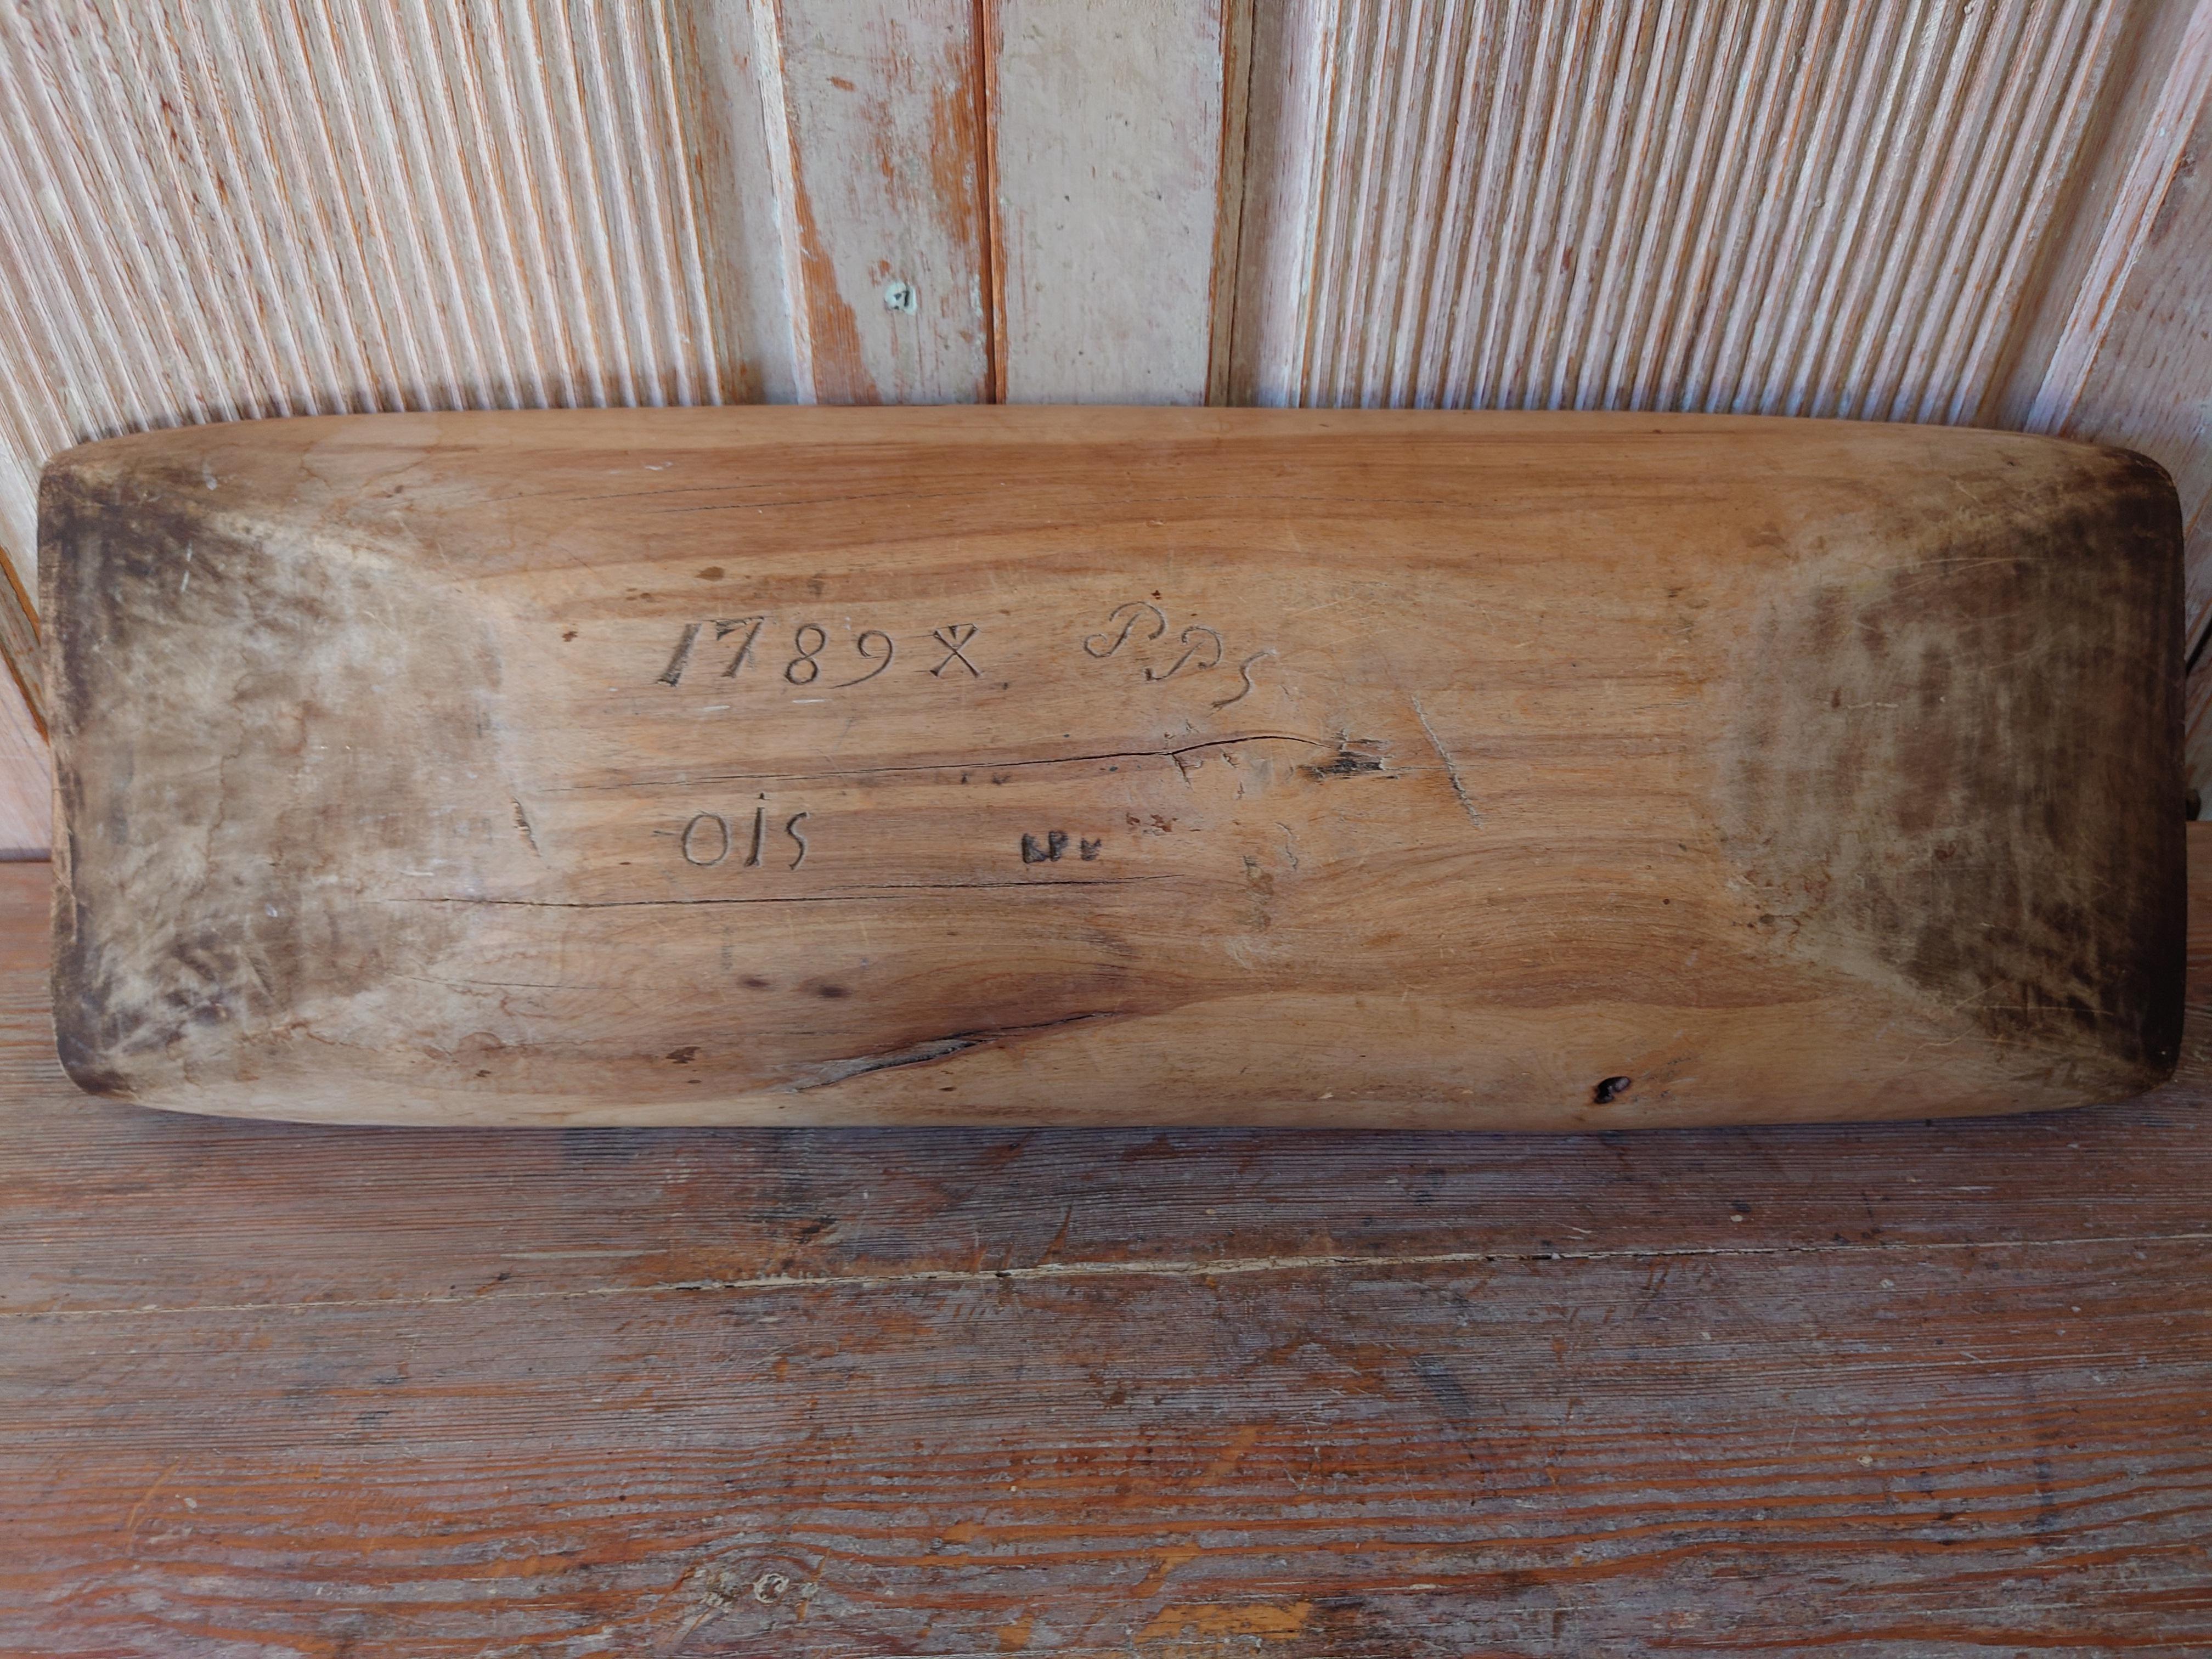 18th Century Swedish Antique Wood Trough /Serving bowl dated 1789 sign PPS OIS  For Sale 1